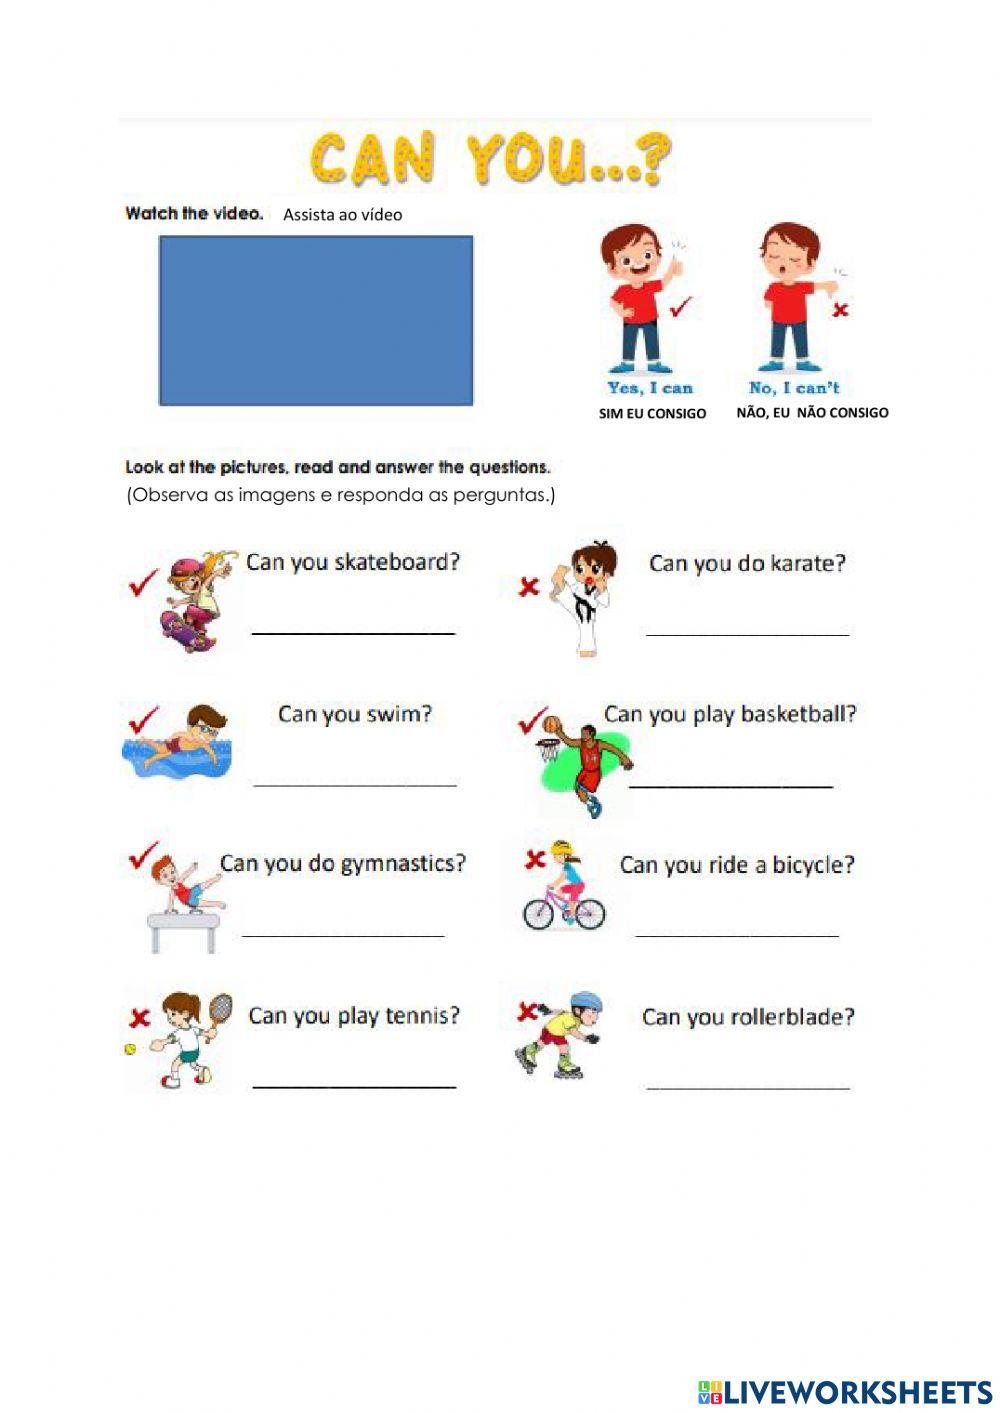 Can or can't - sports worksheet | Live Worksheets